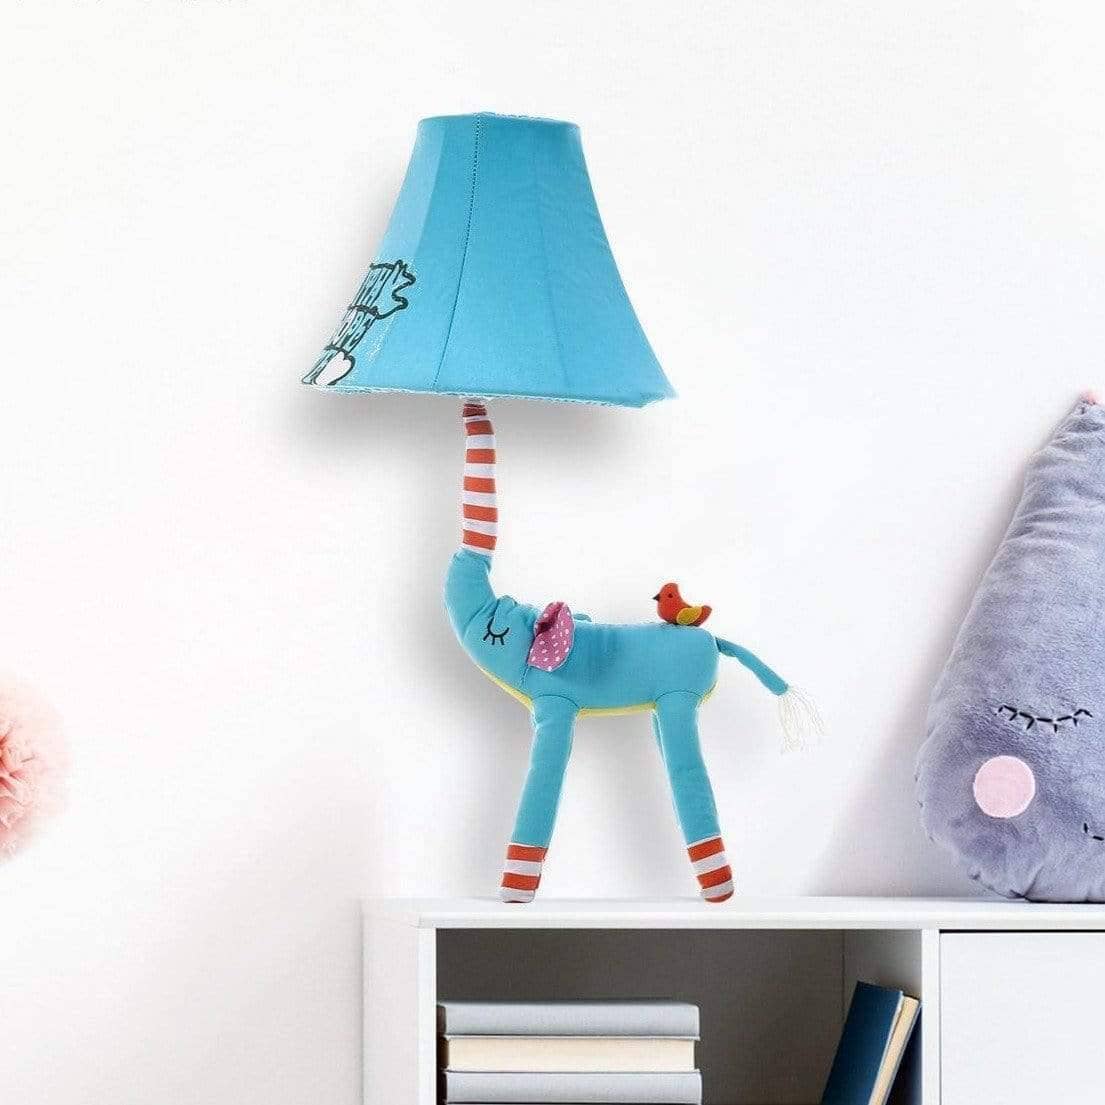 Blue Elephant Night Lamp - Fun Touch for Your Kid's Room Decor